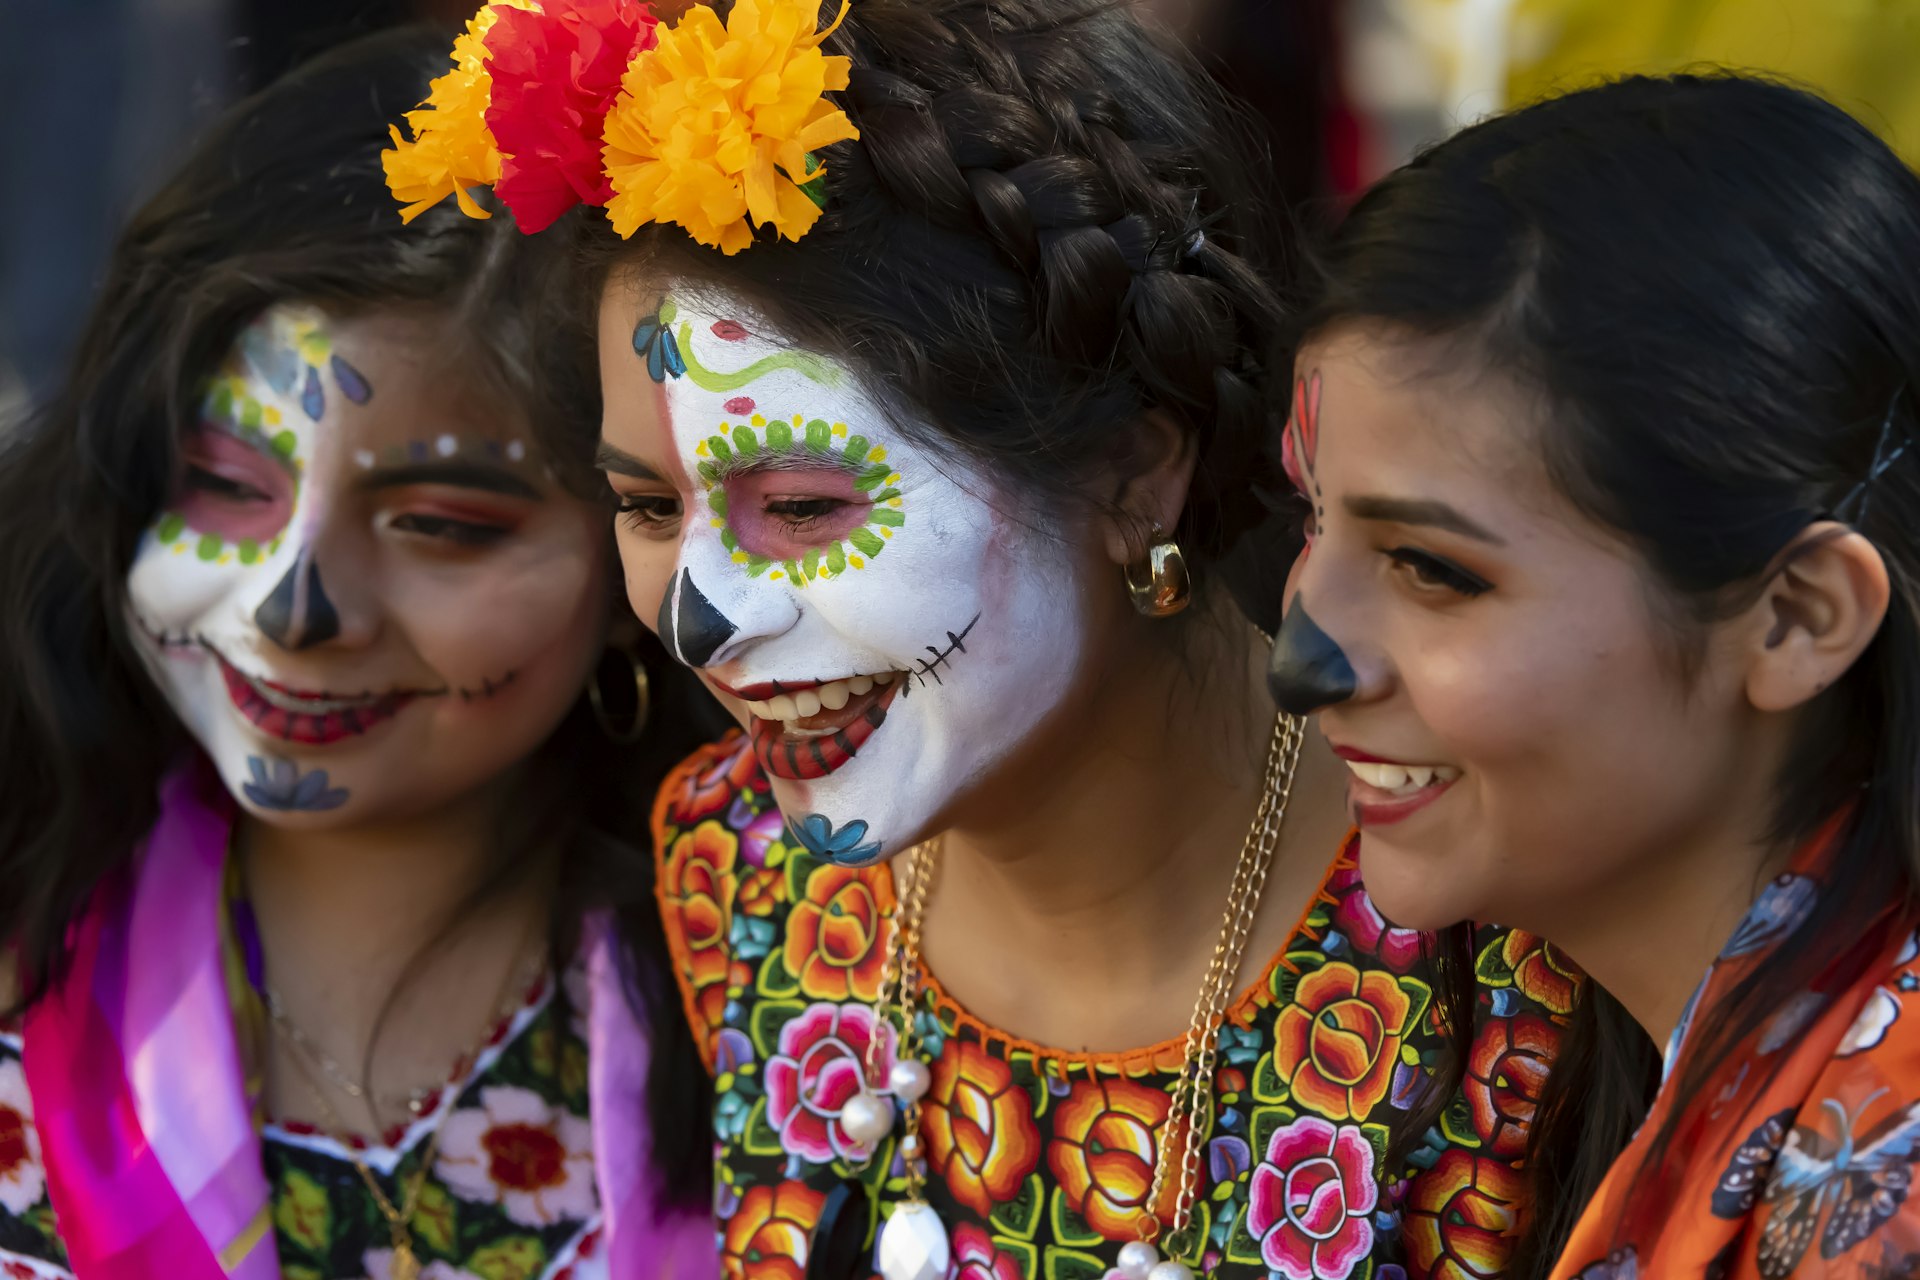 Three girls in traditional outfits, one with skull face paint, at the Dí­a de los Muertos festival in Oaxaca